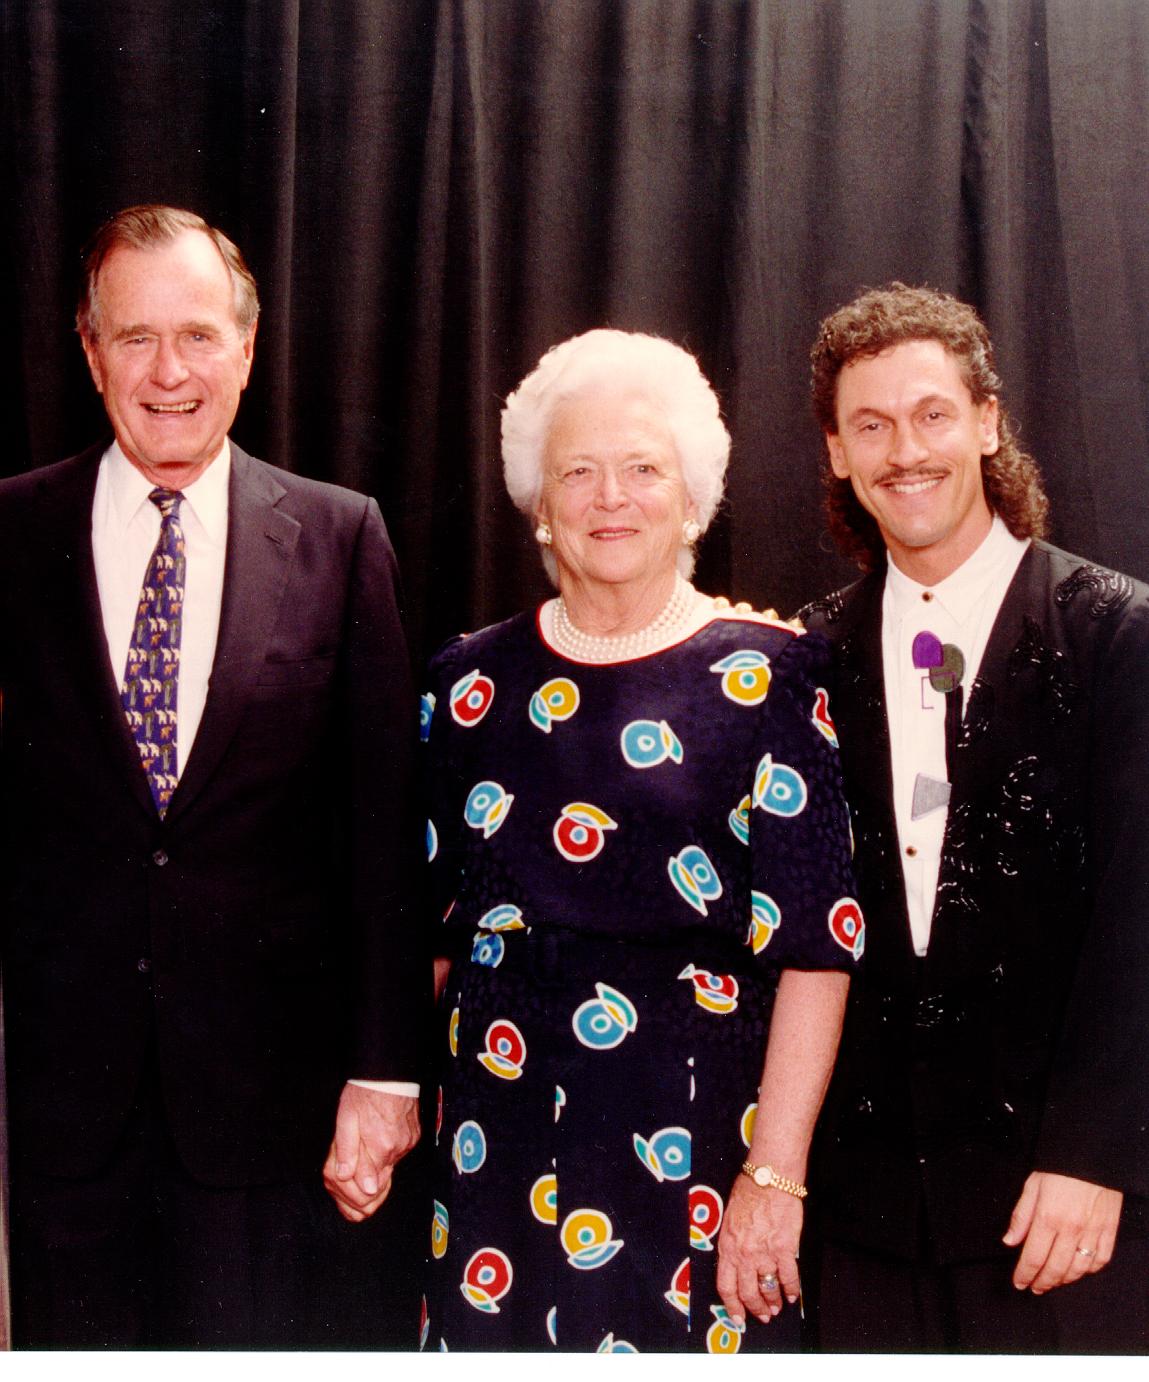 Composer Tad Sisler with President and Mrs. George H.W. Bush